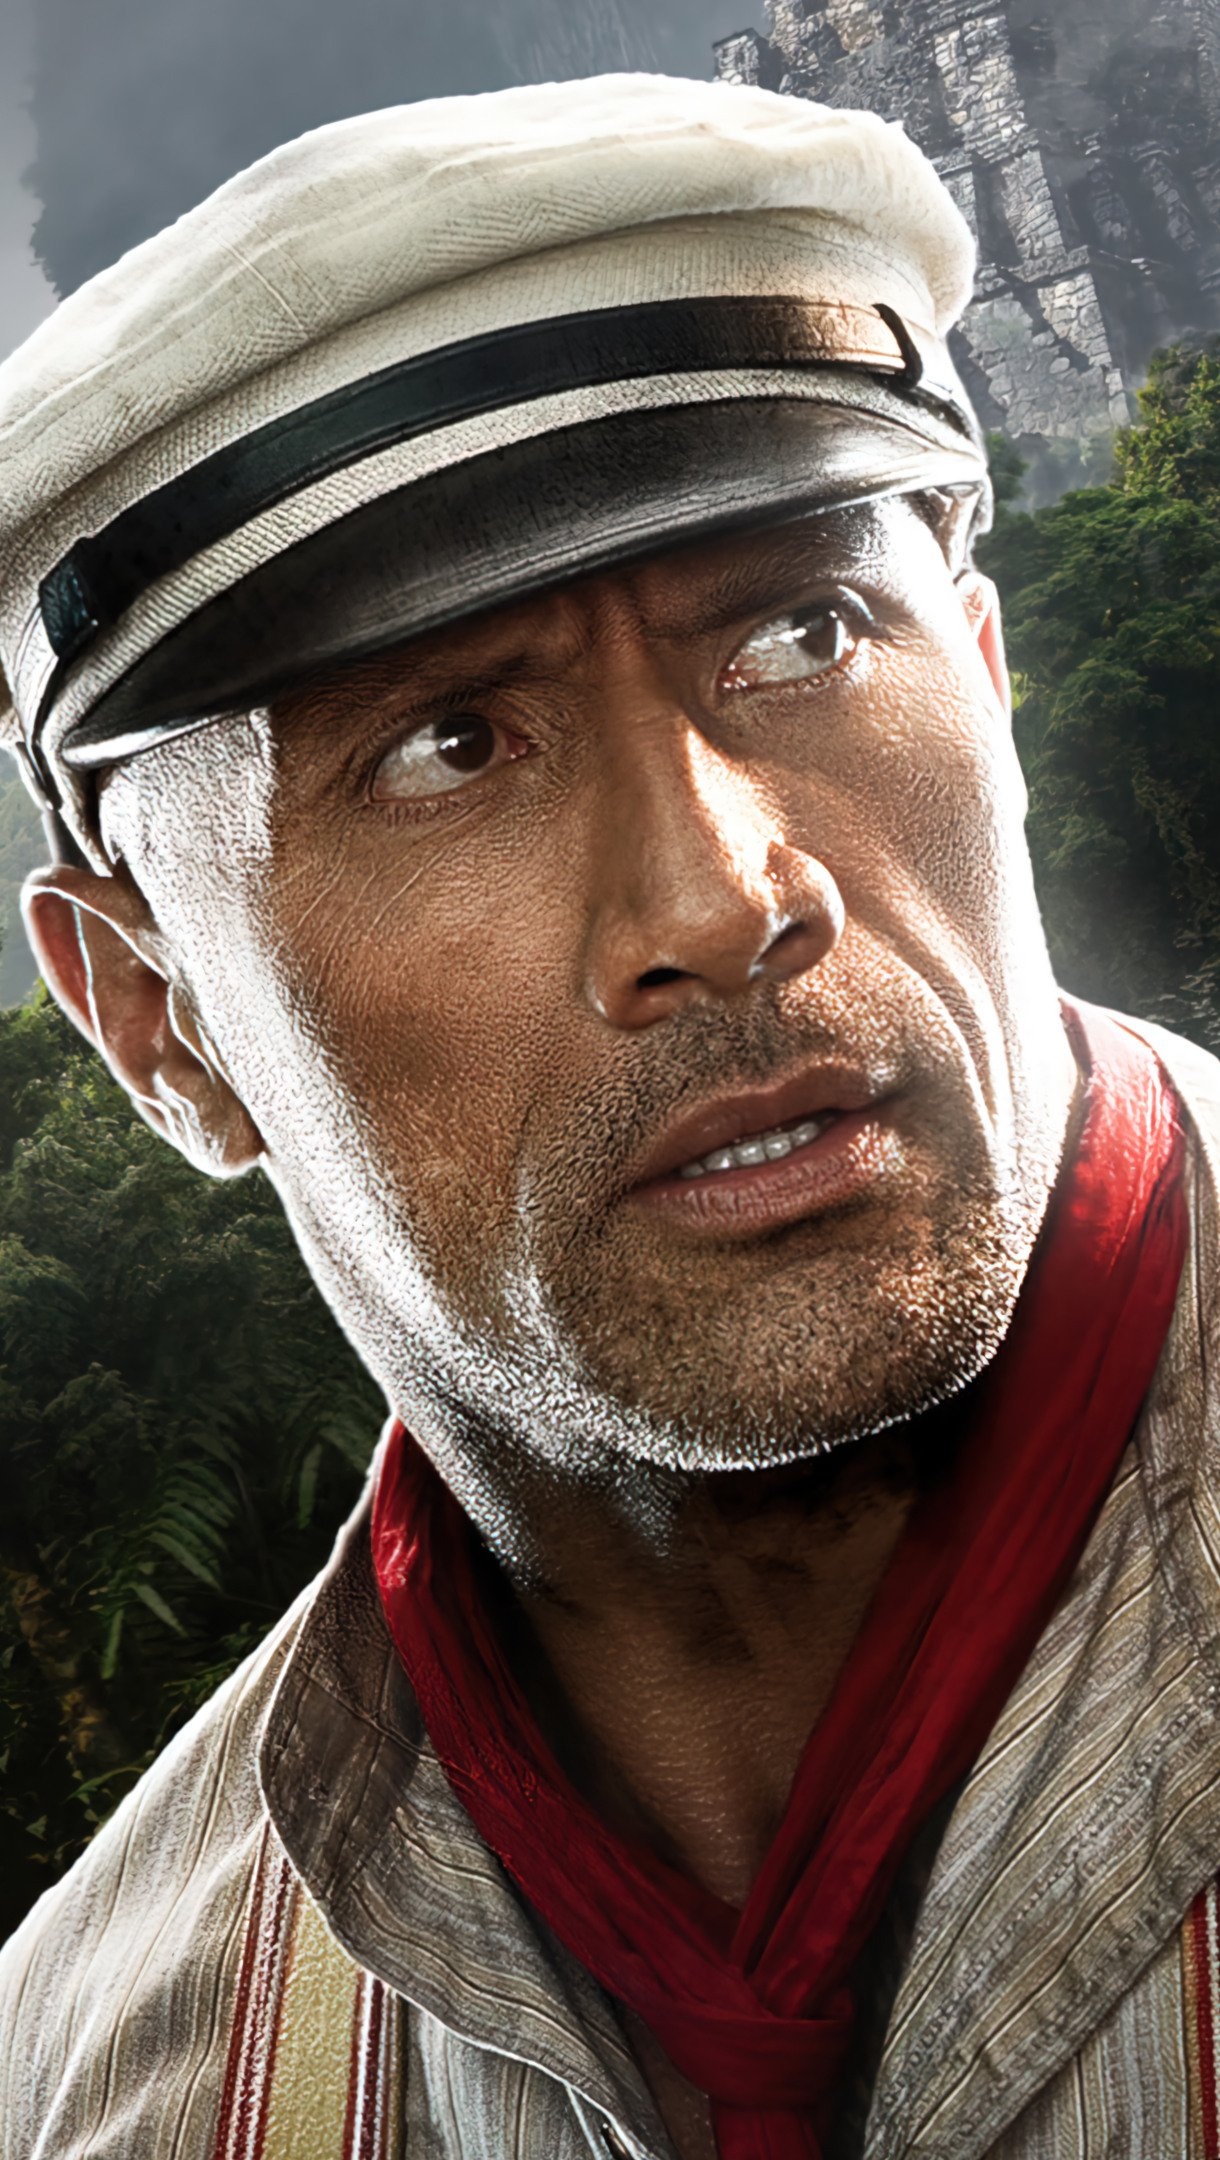 Dwayne Johnson in Jungle Cruise, 4k Ultra HD wallpaper, Action hero, Epic jungle expedition, 1220x2160 HD Handy